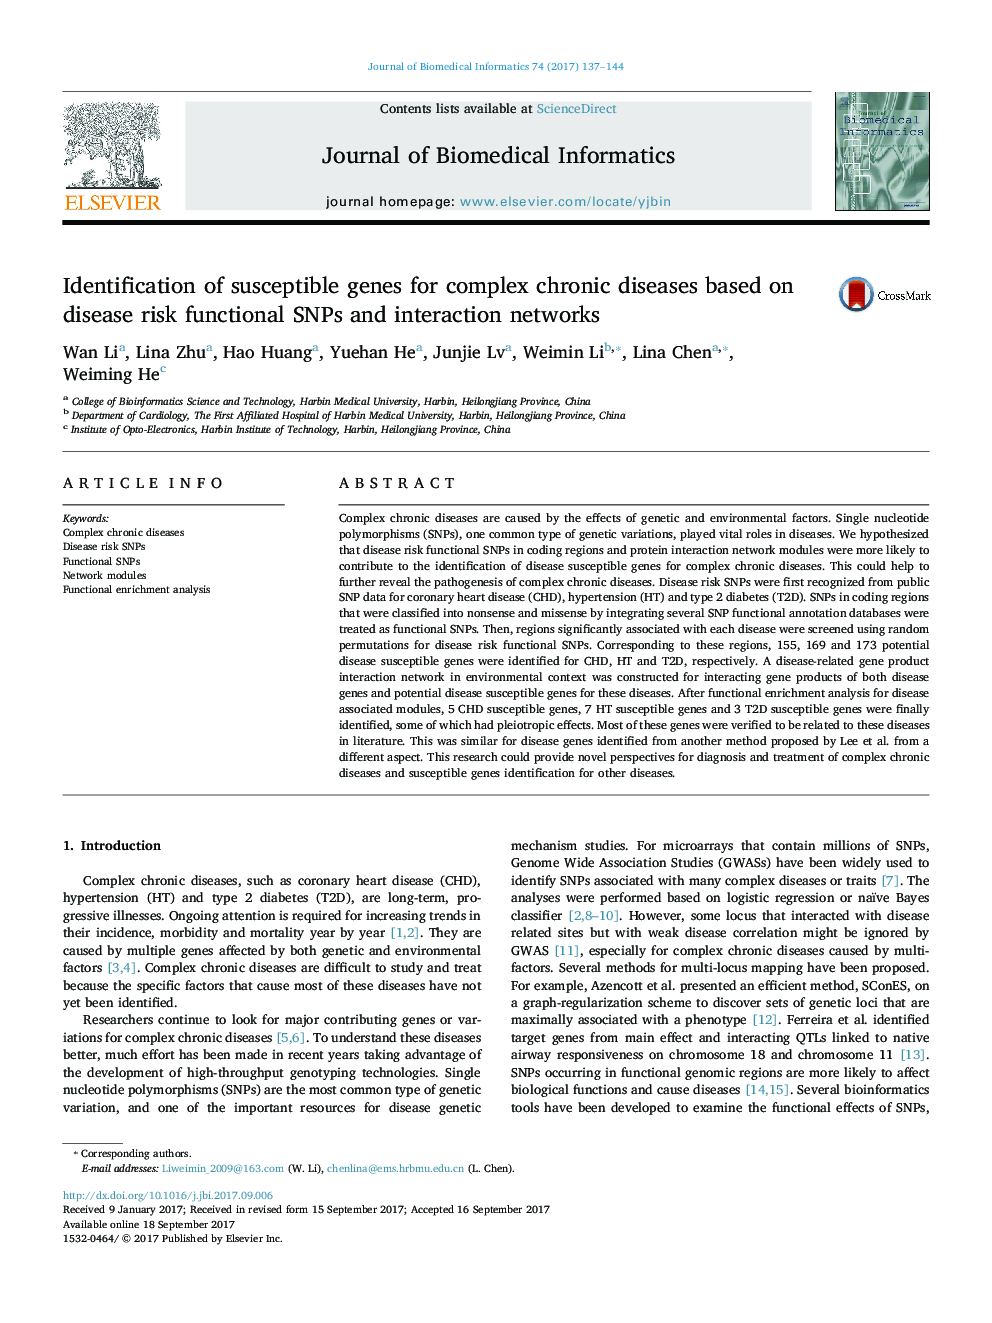 Identification of susceptible genes for complex chronic diseases based on disease risk functional SNPs and interaction networks